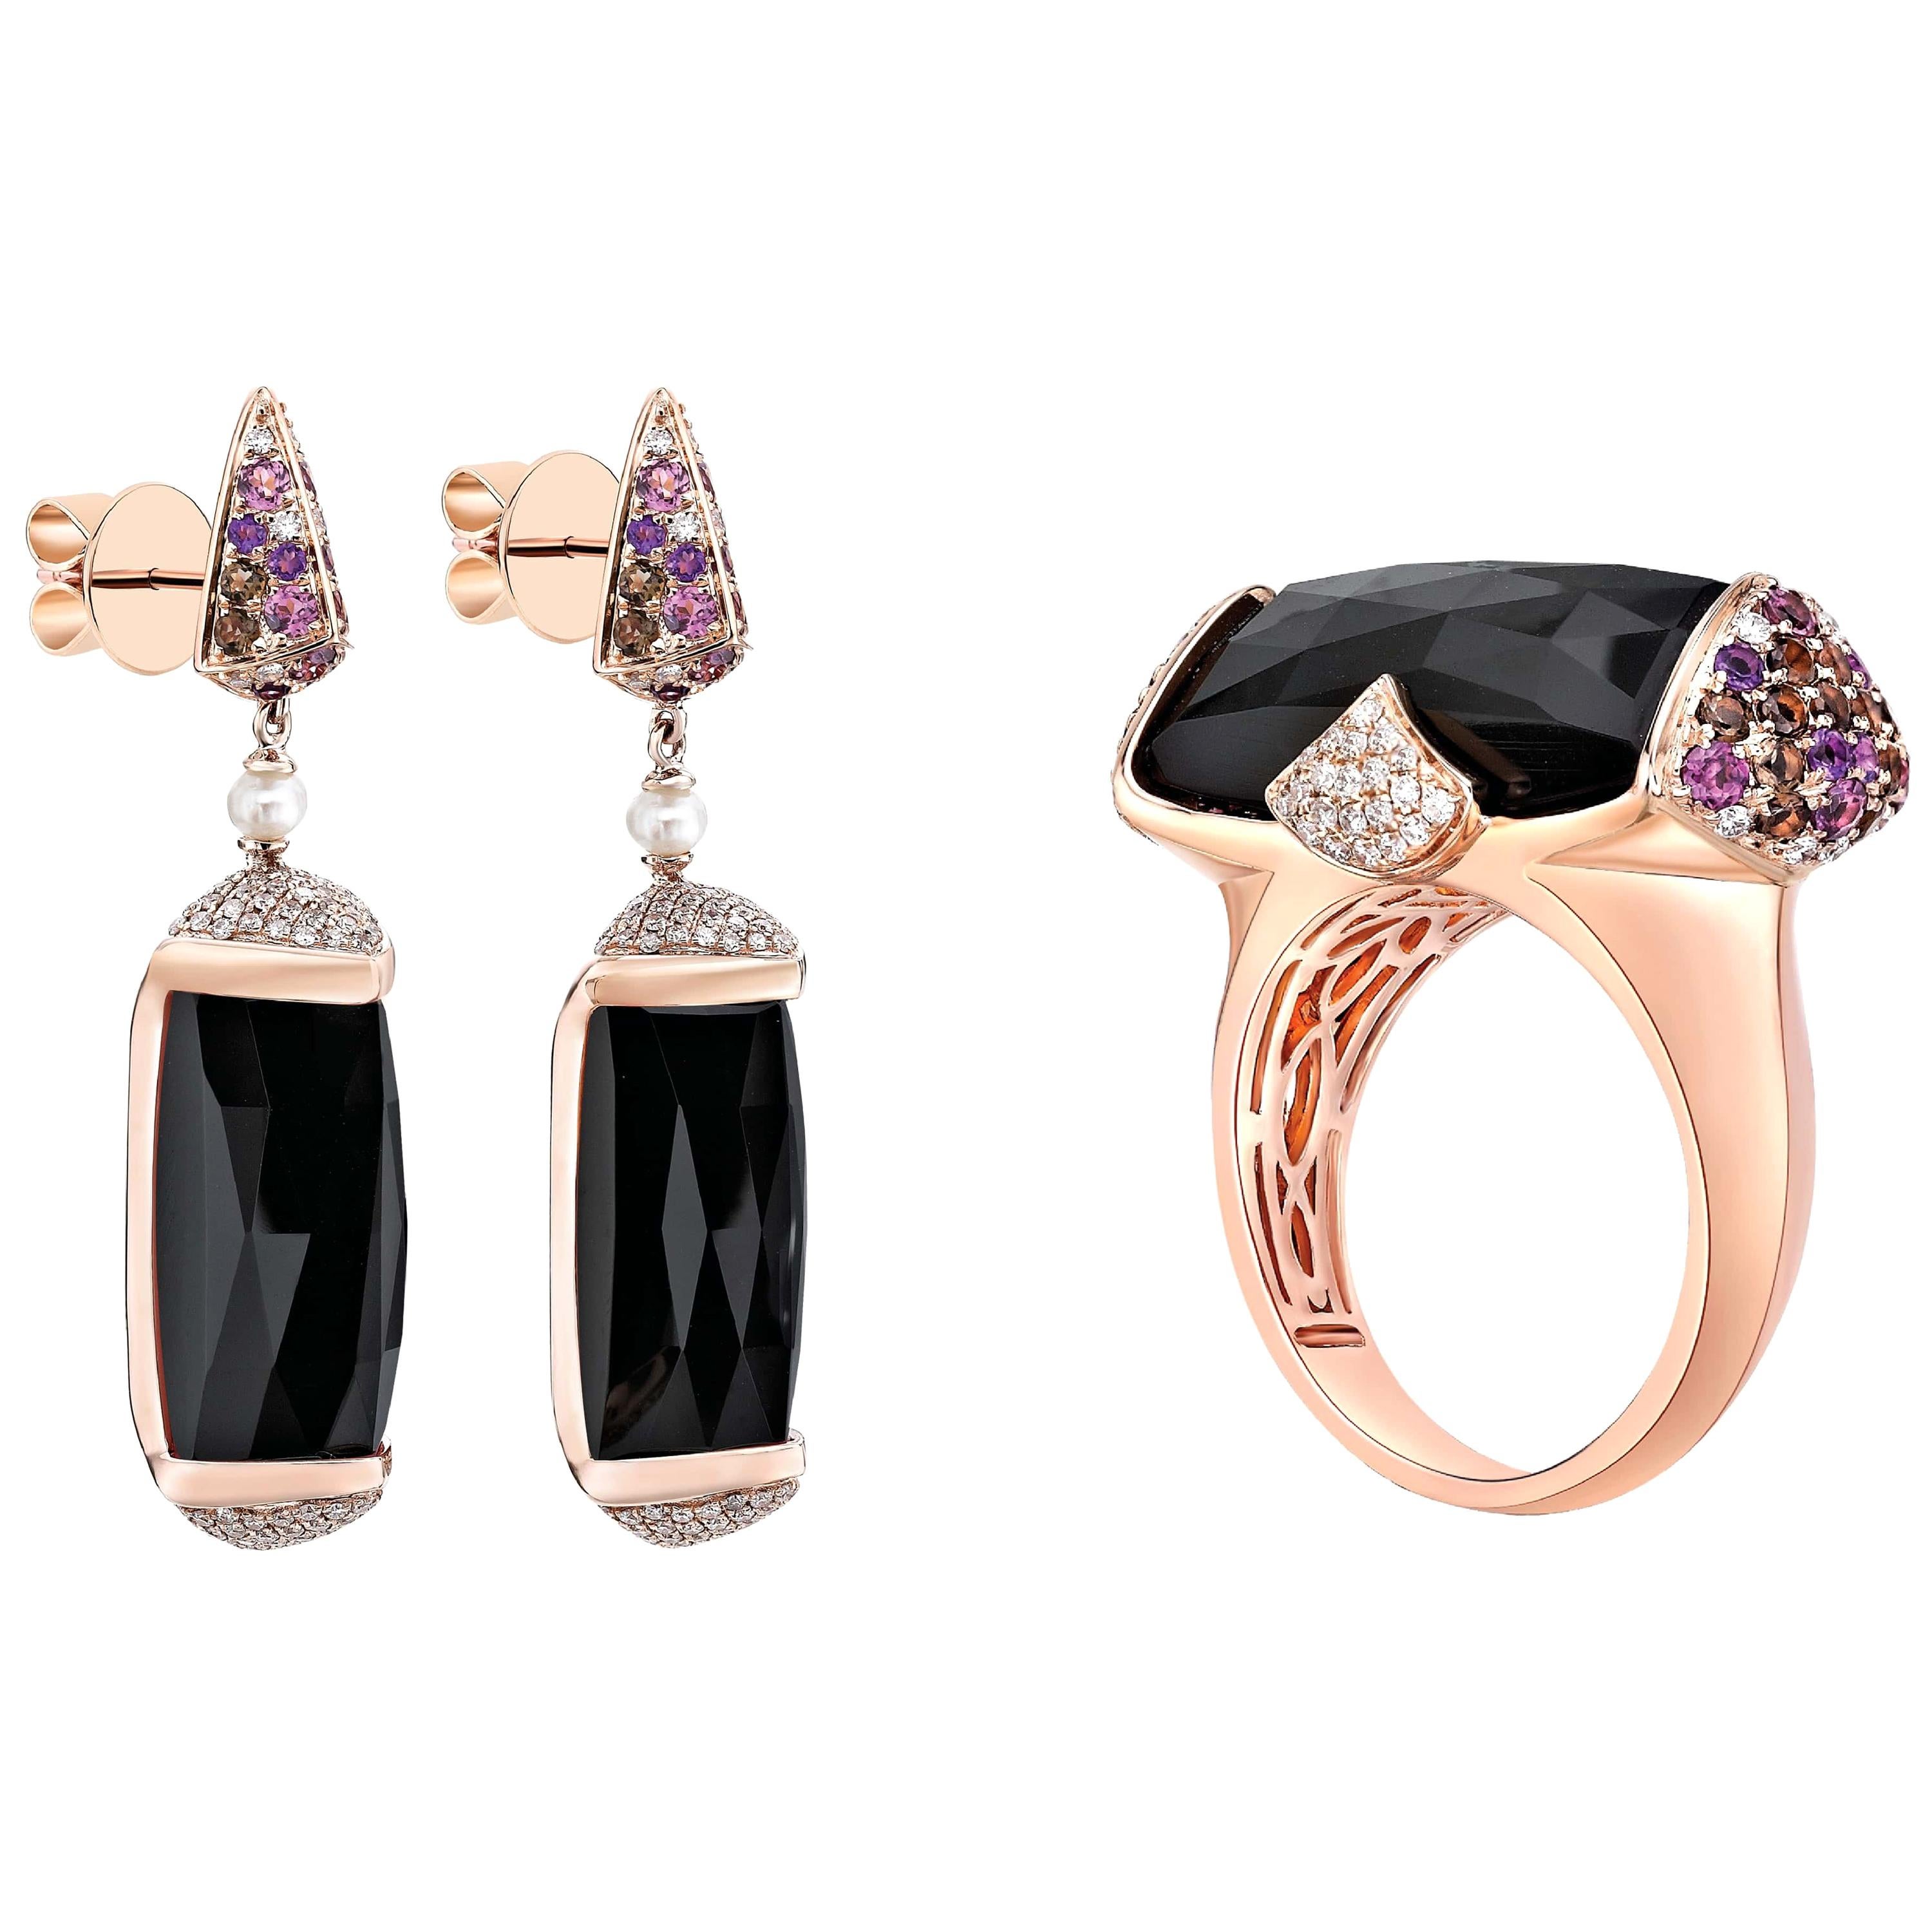 45 Carat Black Onyx Ring and Earring Set in 18 Karat Rose Gold with Diamonds